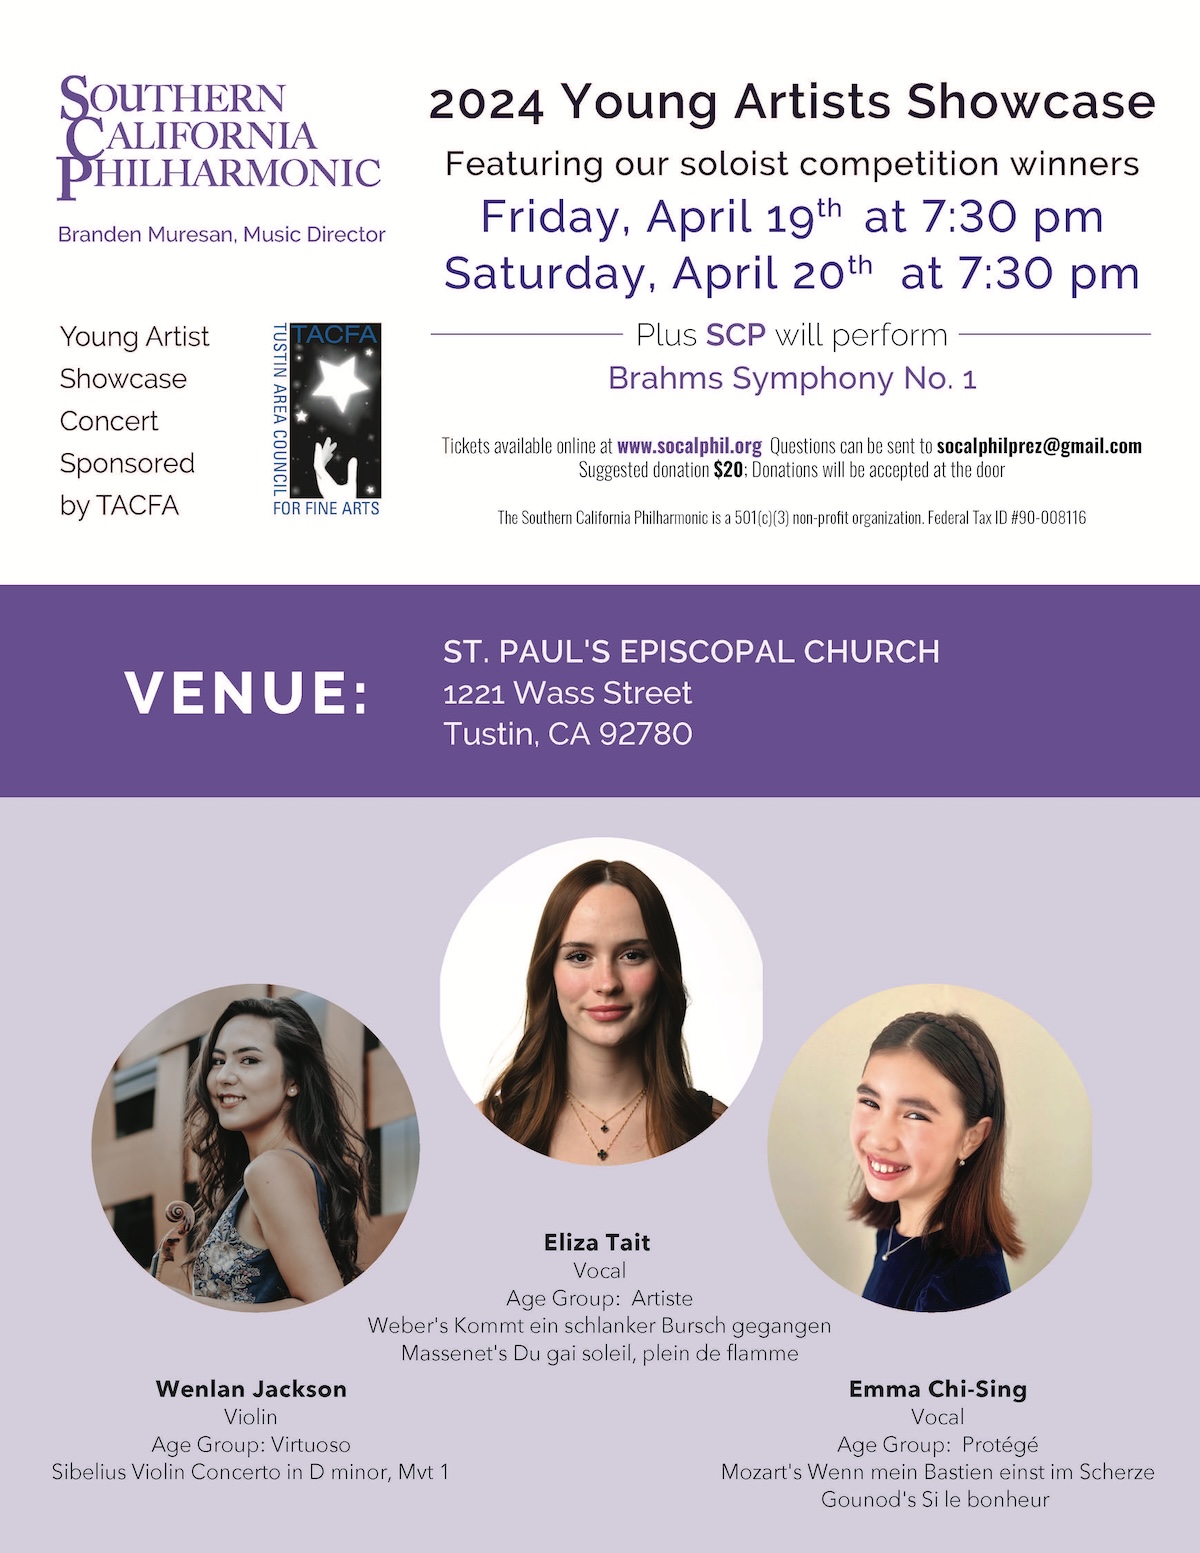 Promotional poster for a classical music concert featuring soloist performances, hosted by the southern california philharmonic on april 19th and 20th.